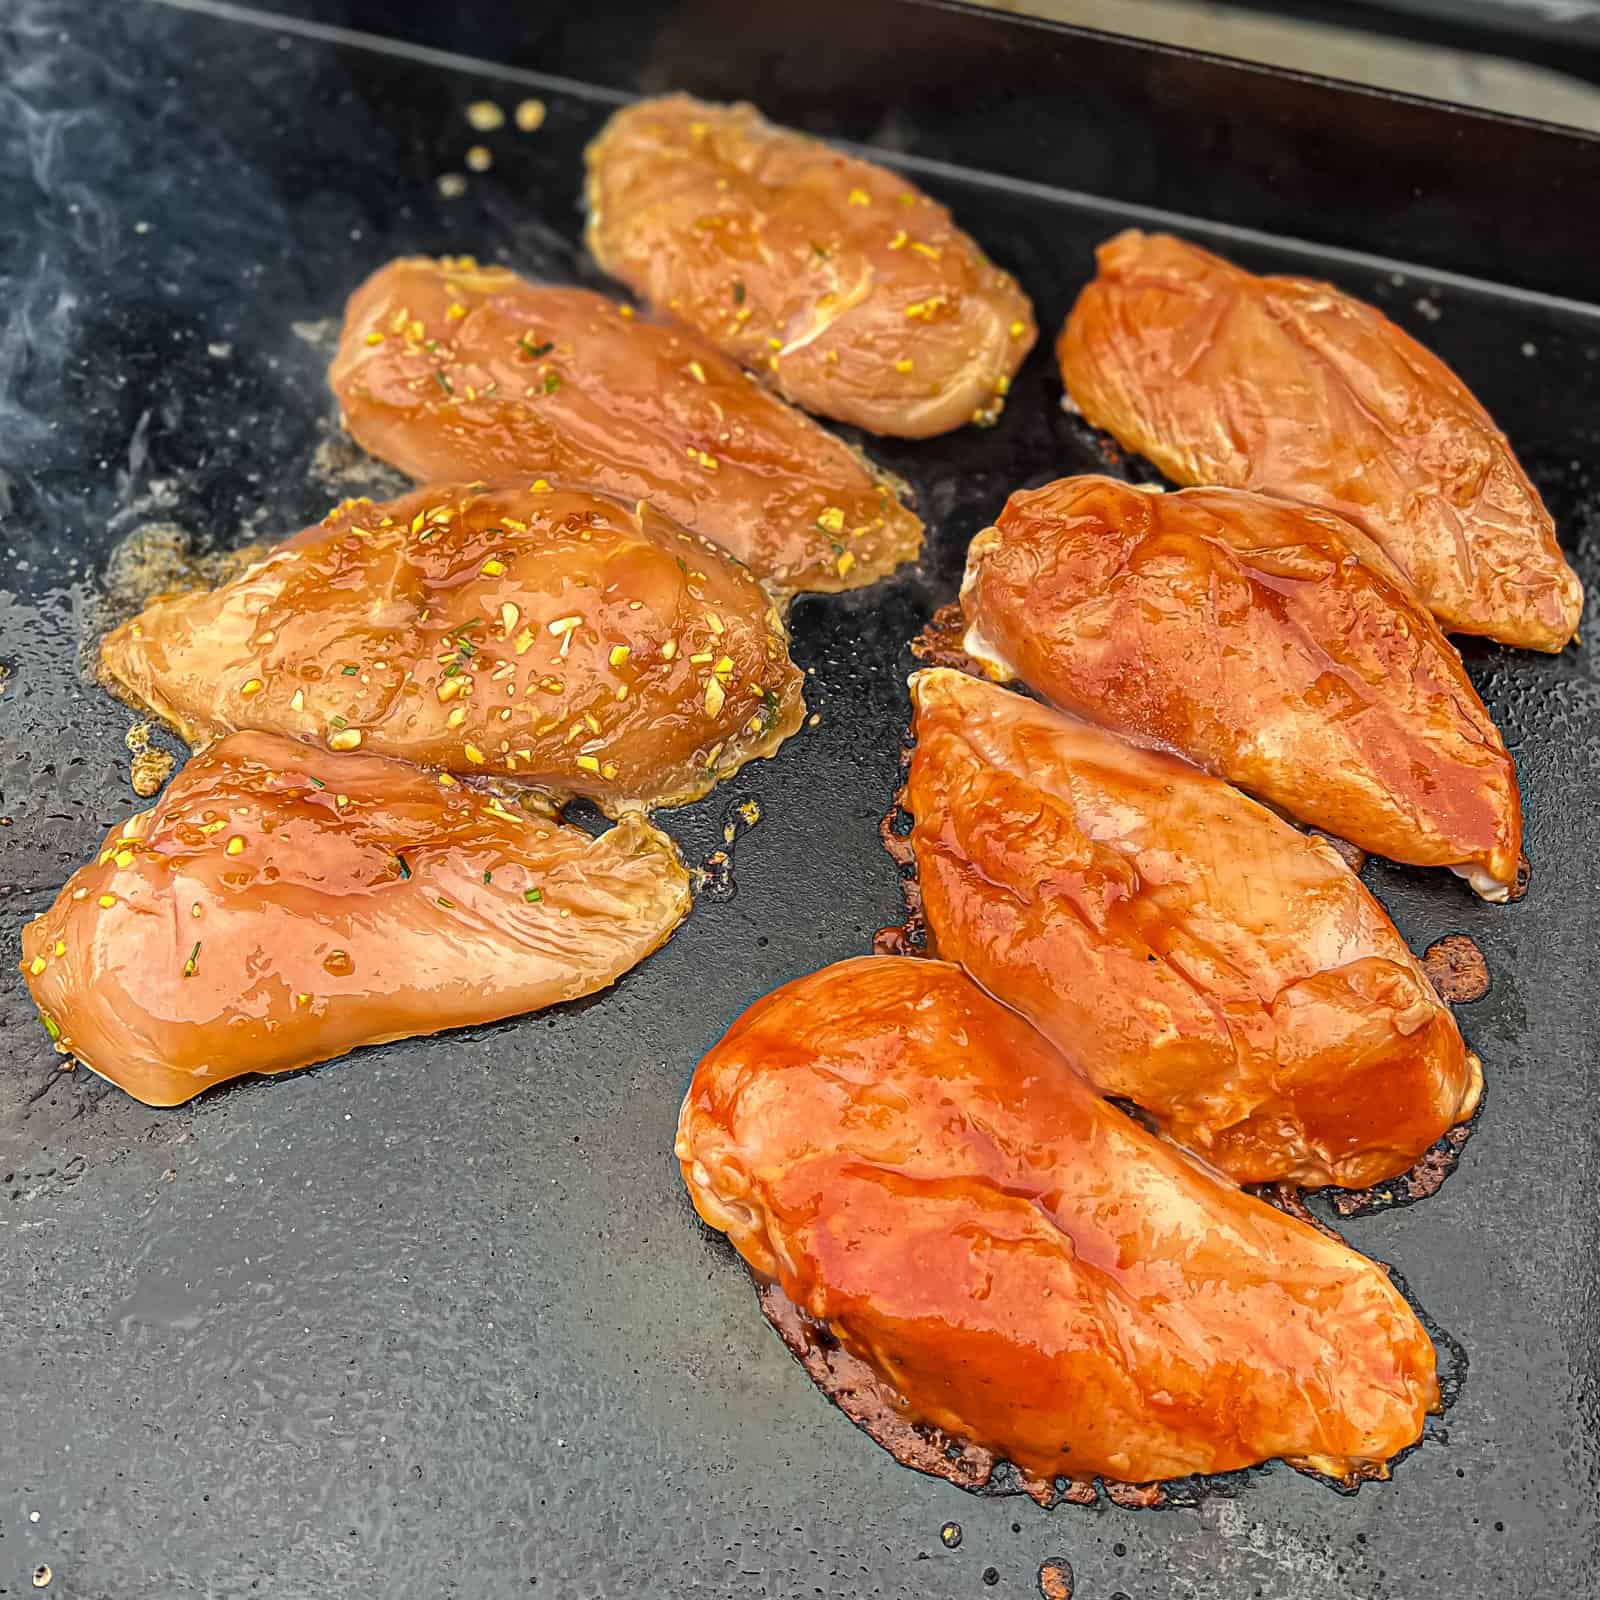 Flattop Griddle Chicken Breast Recipe on Traeger Flatrock Grill with BBQ Sauce and Teriyaki Marinades